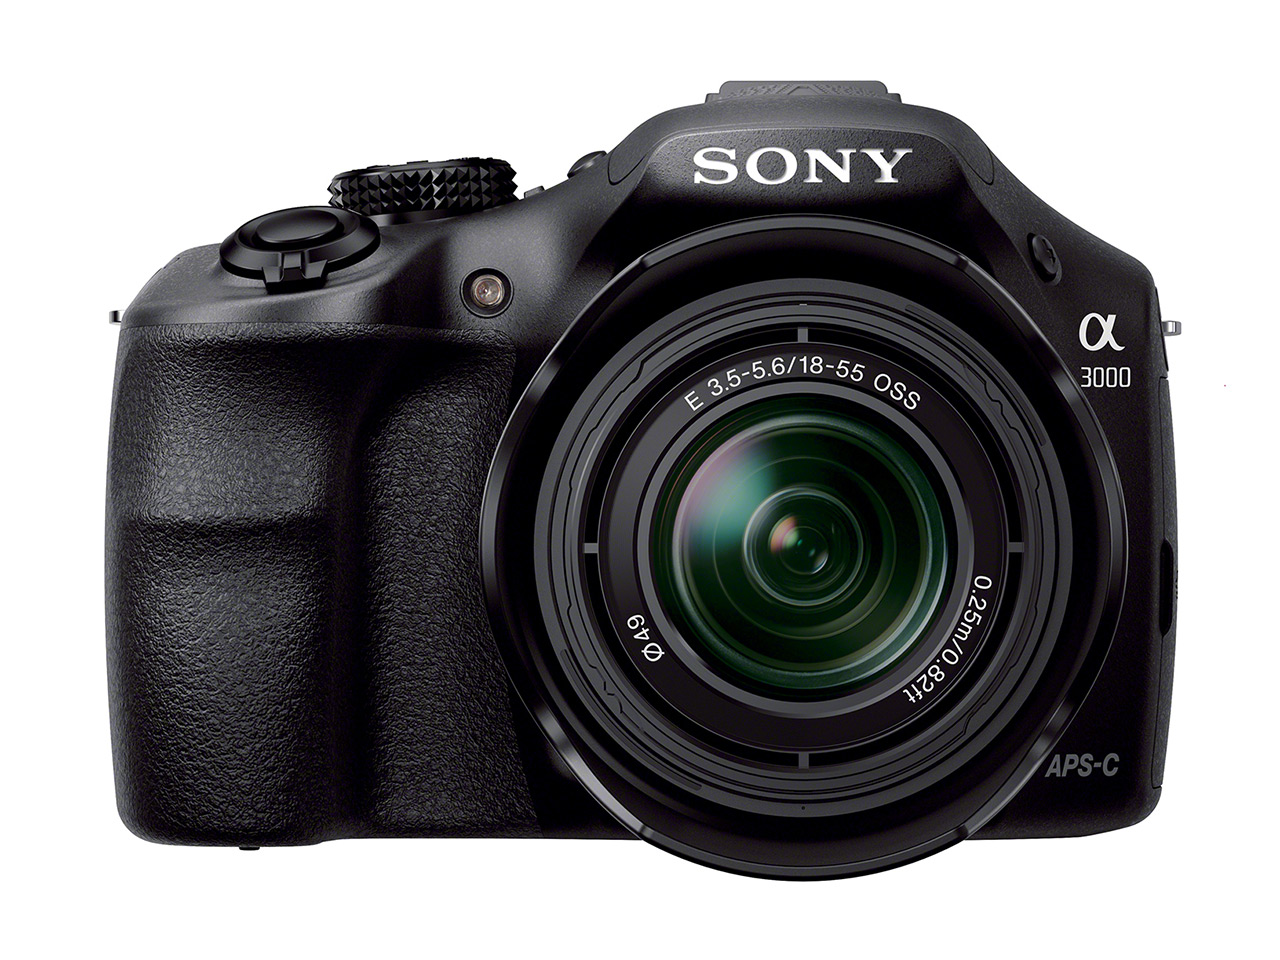 sony-a3000-a-dslr-style-mirrorless-interchangeable-lens-camera